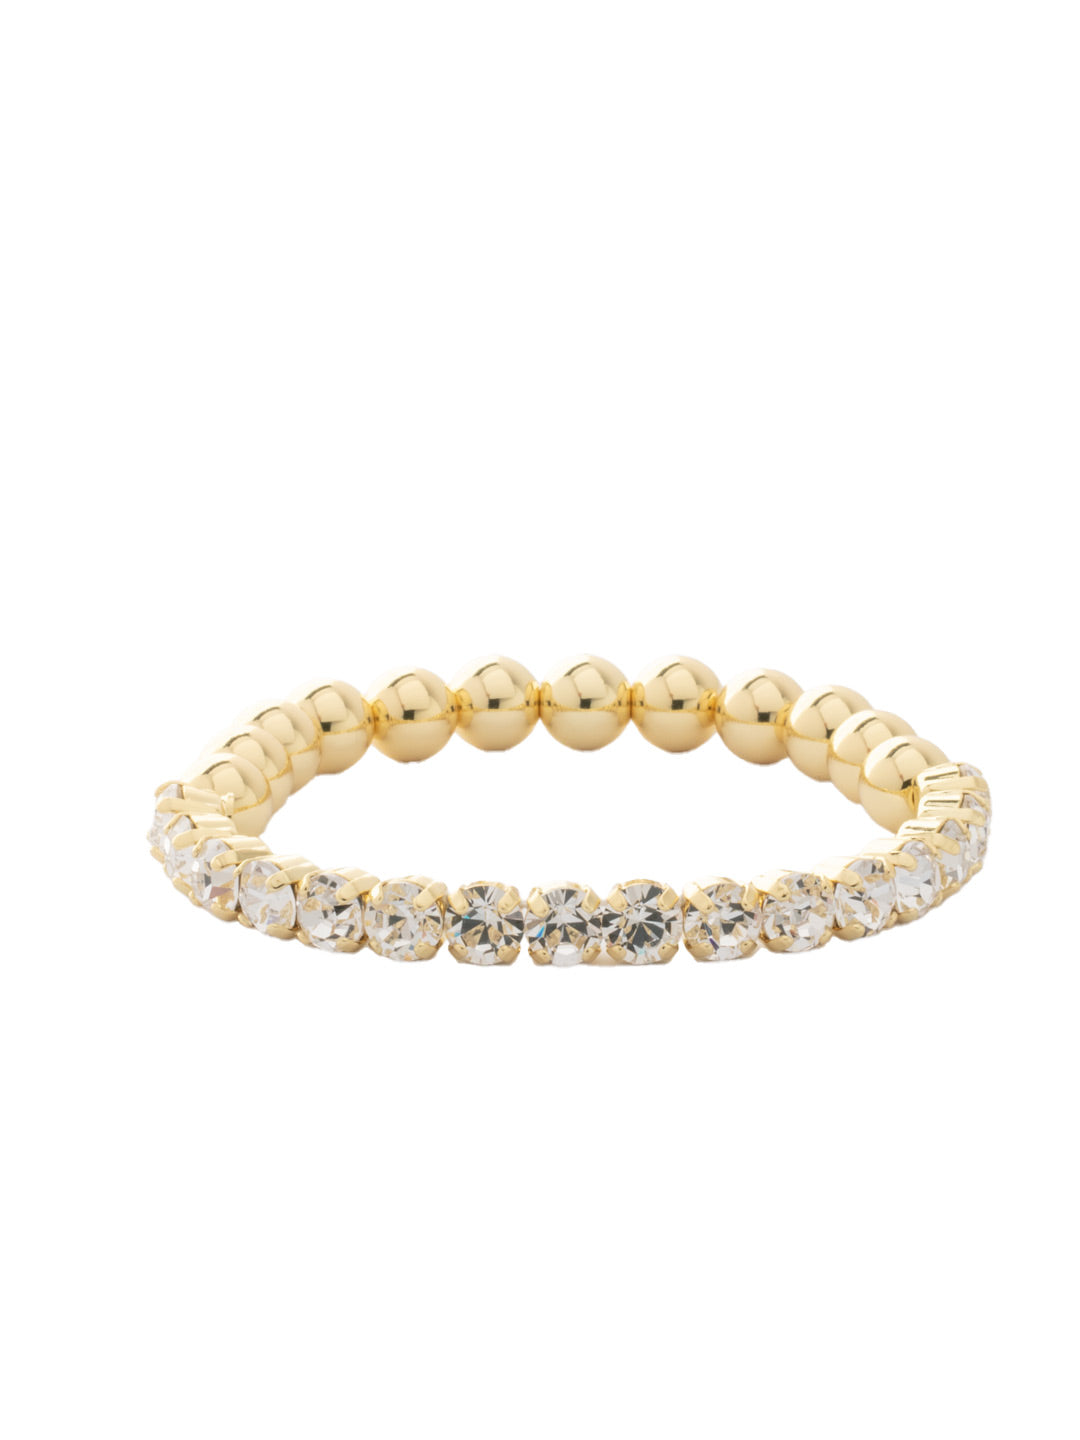 Mini Crystal Zola Stretch Bracelet - 4BFL5BGCRY - <p>The Mini Crystal Zola Stretch Bracelet features half mini crystals and half beaded balls on a sturdy jewelers' filament, stretching to fit most wrists comfortably, without the hassle of a clasp! From Sorrelli's Crystal collection in our Bright Gold-tone finish.</p>